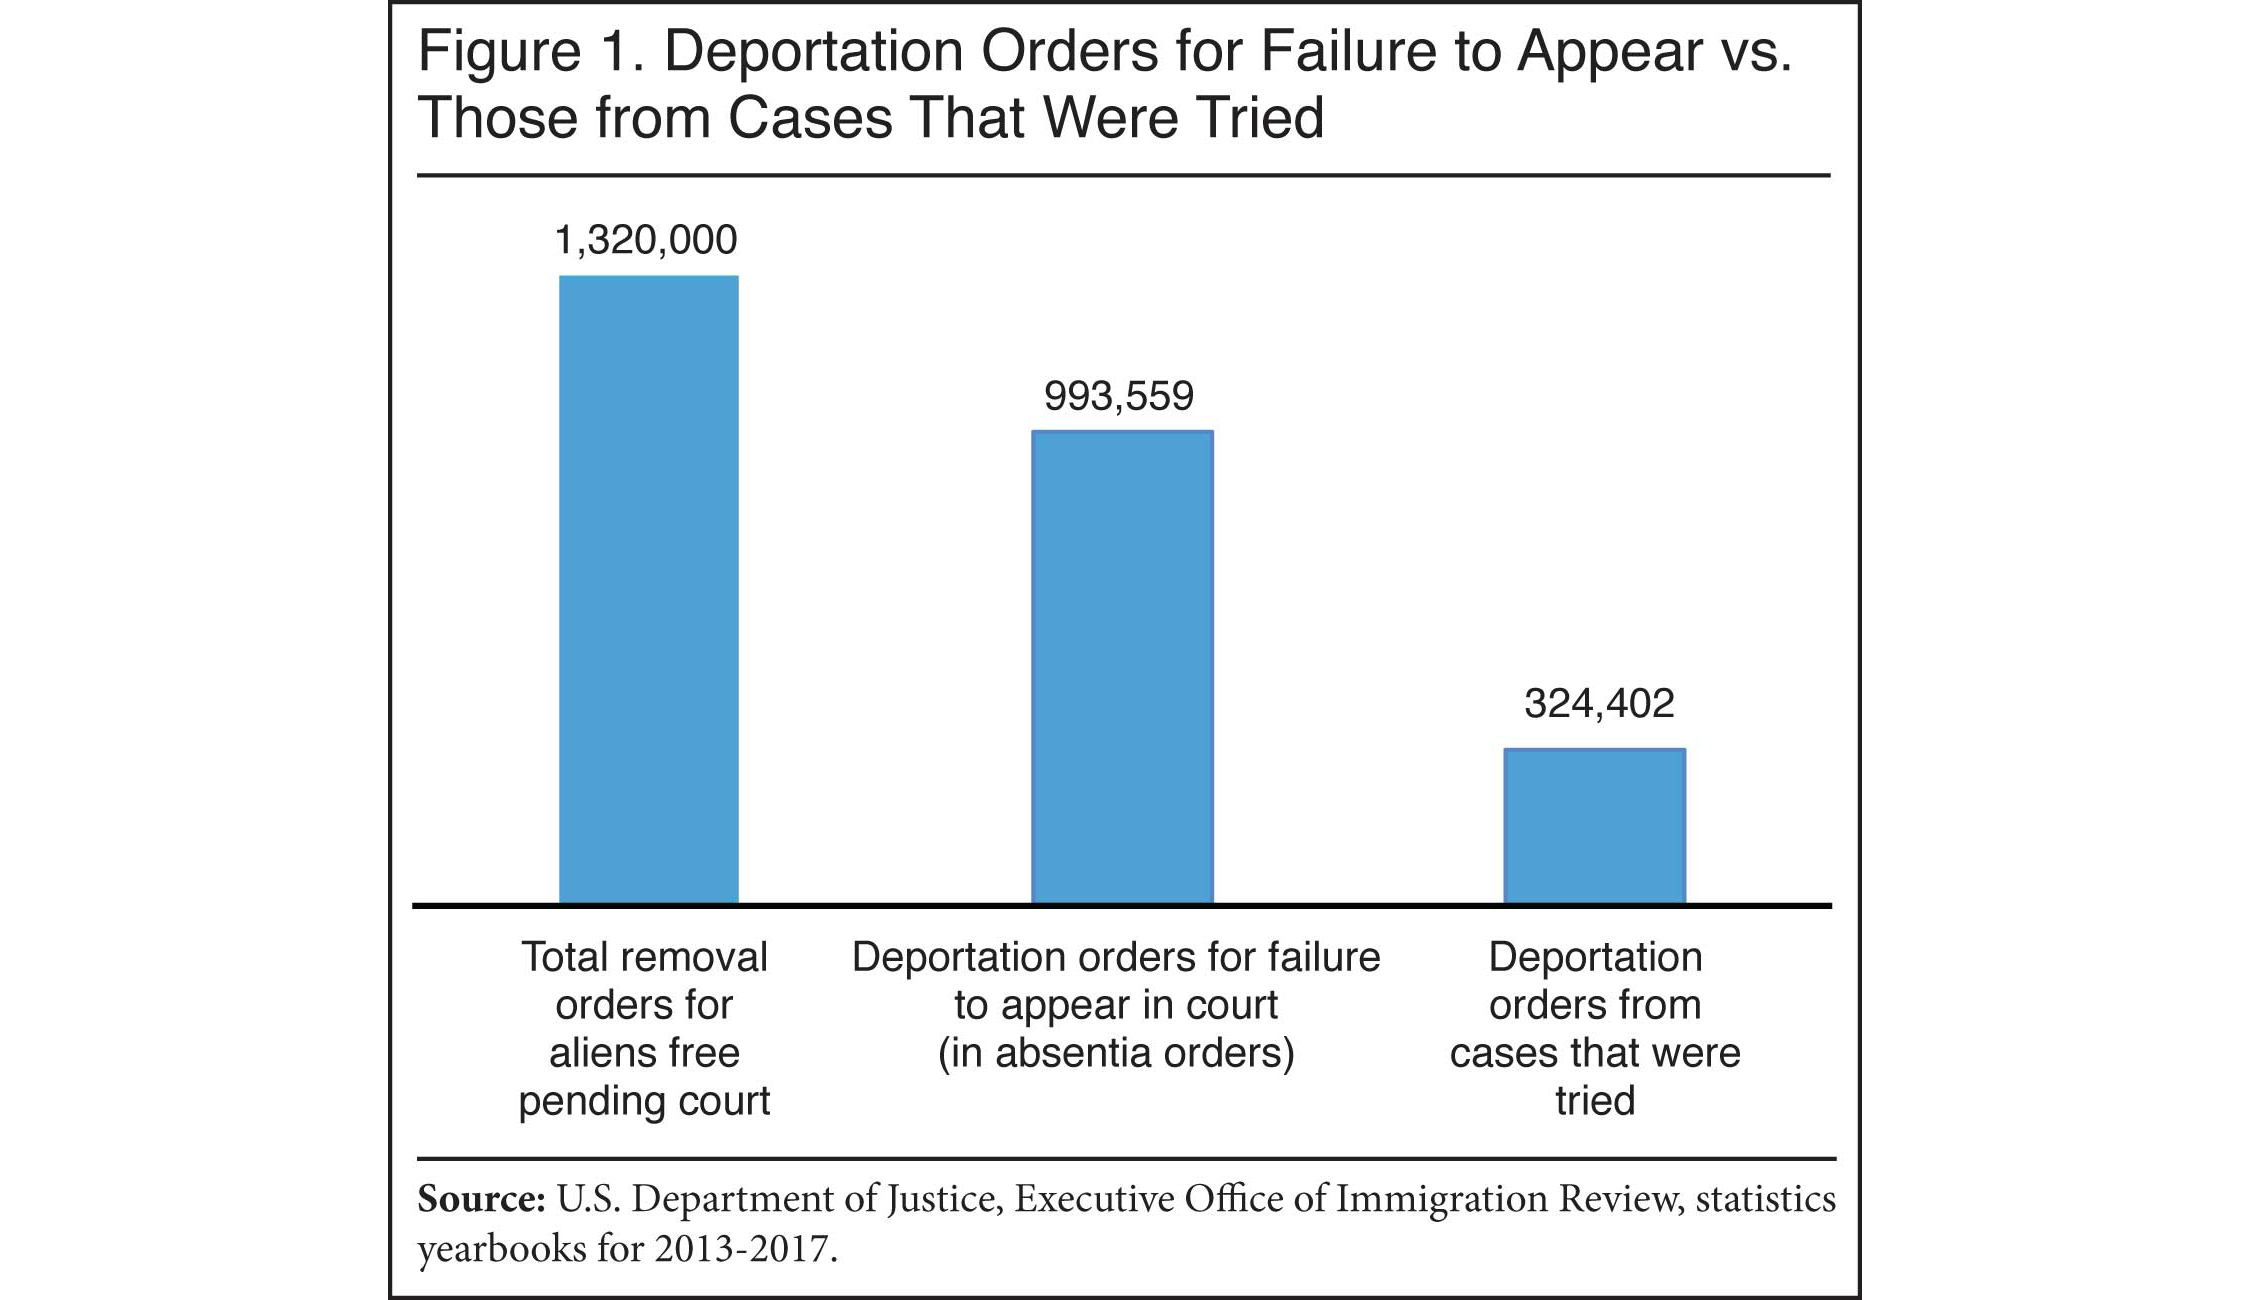 Graph: Deportation Orders for Failure to Appear vs. Those from Cases That Were Tried